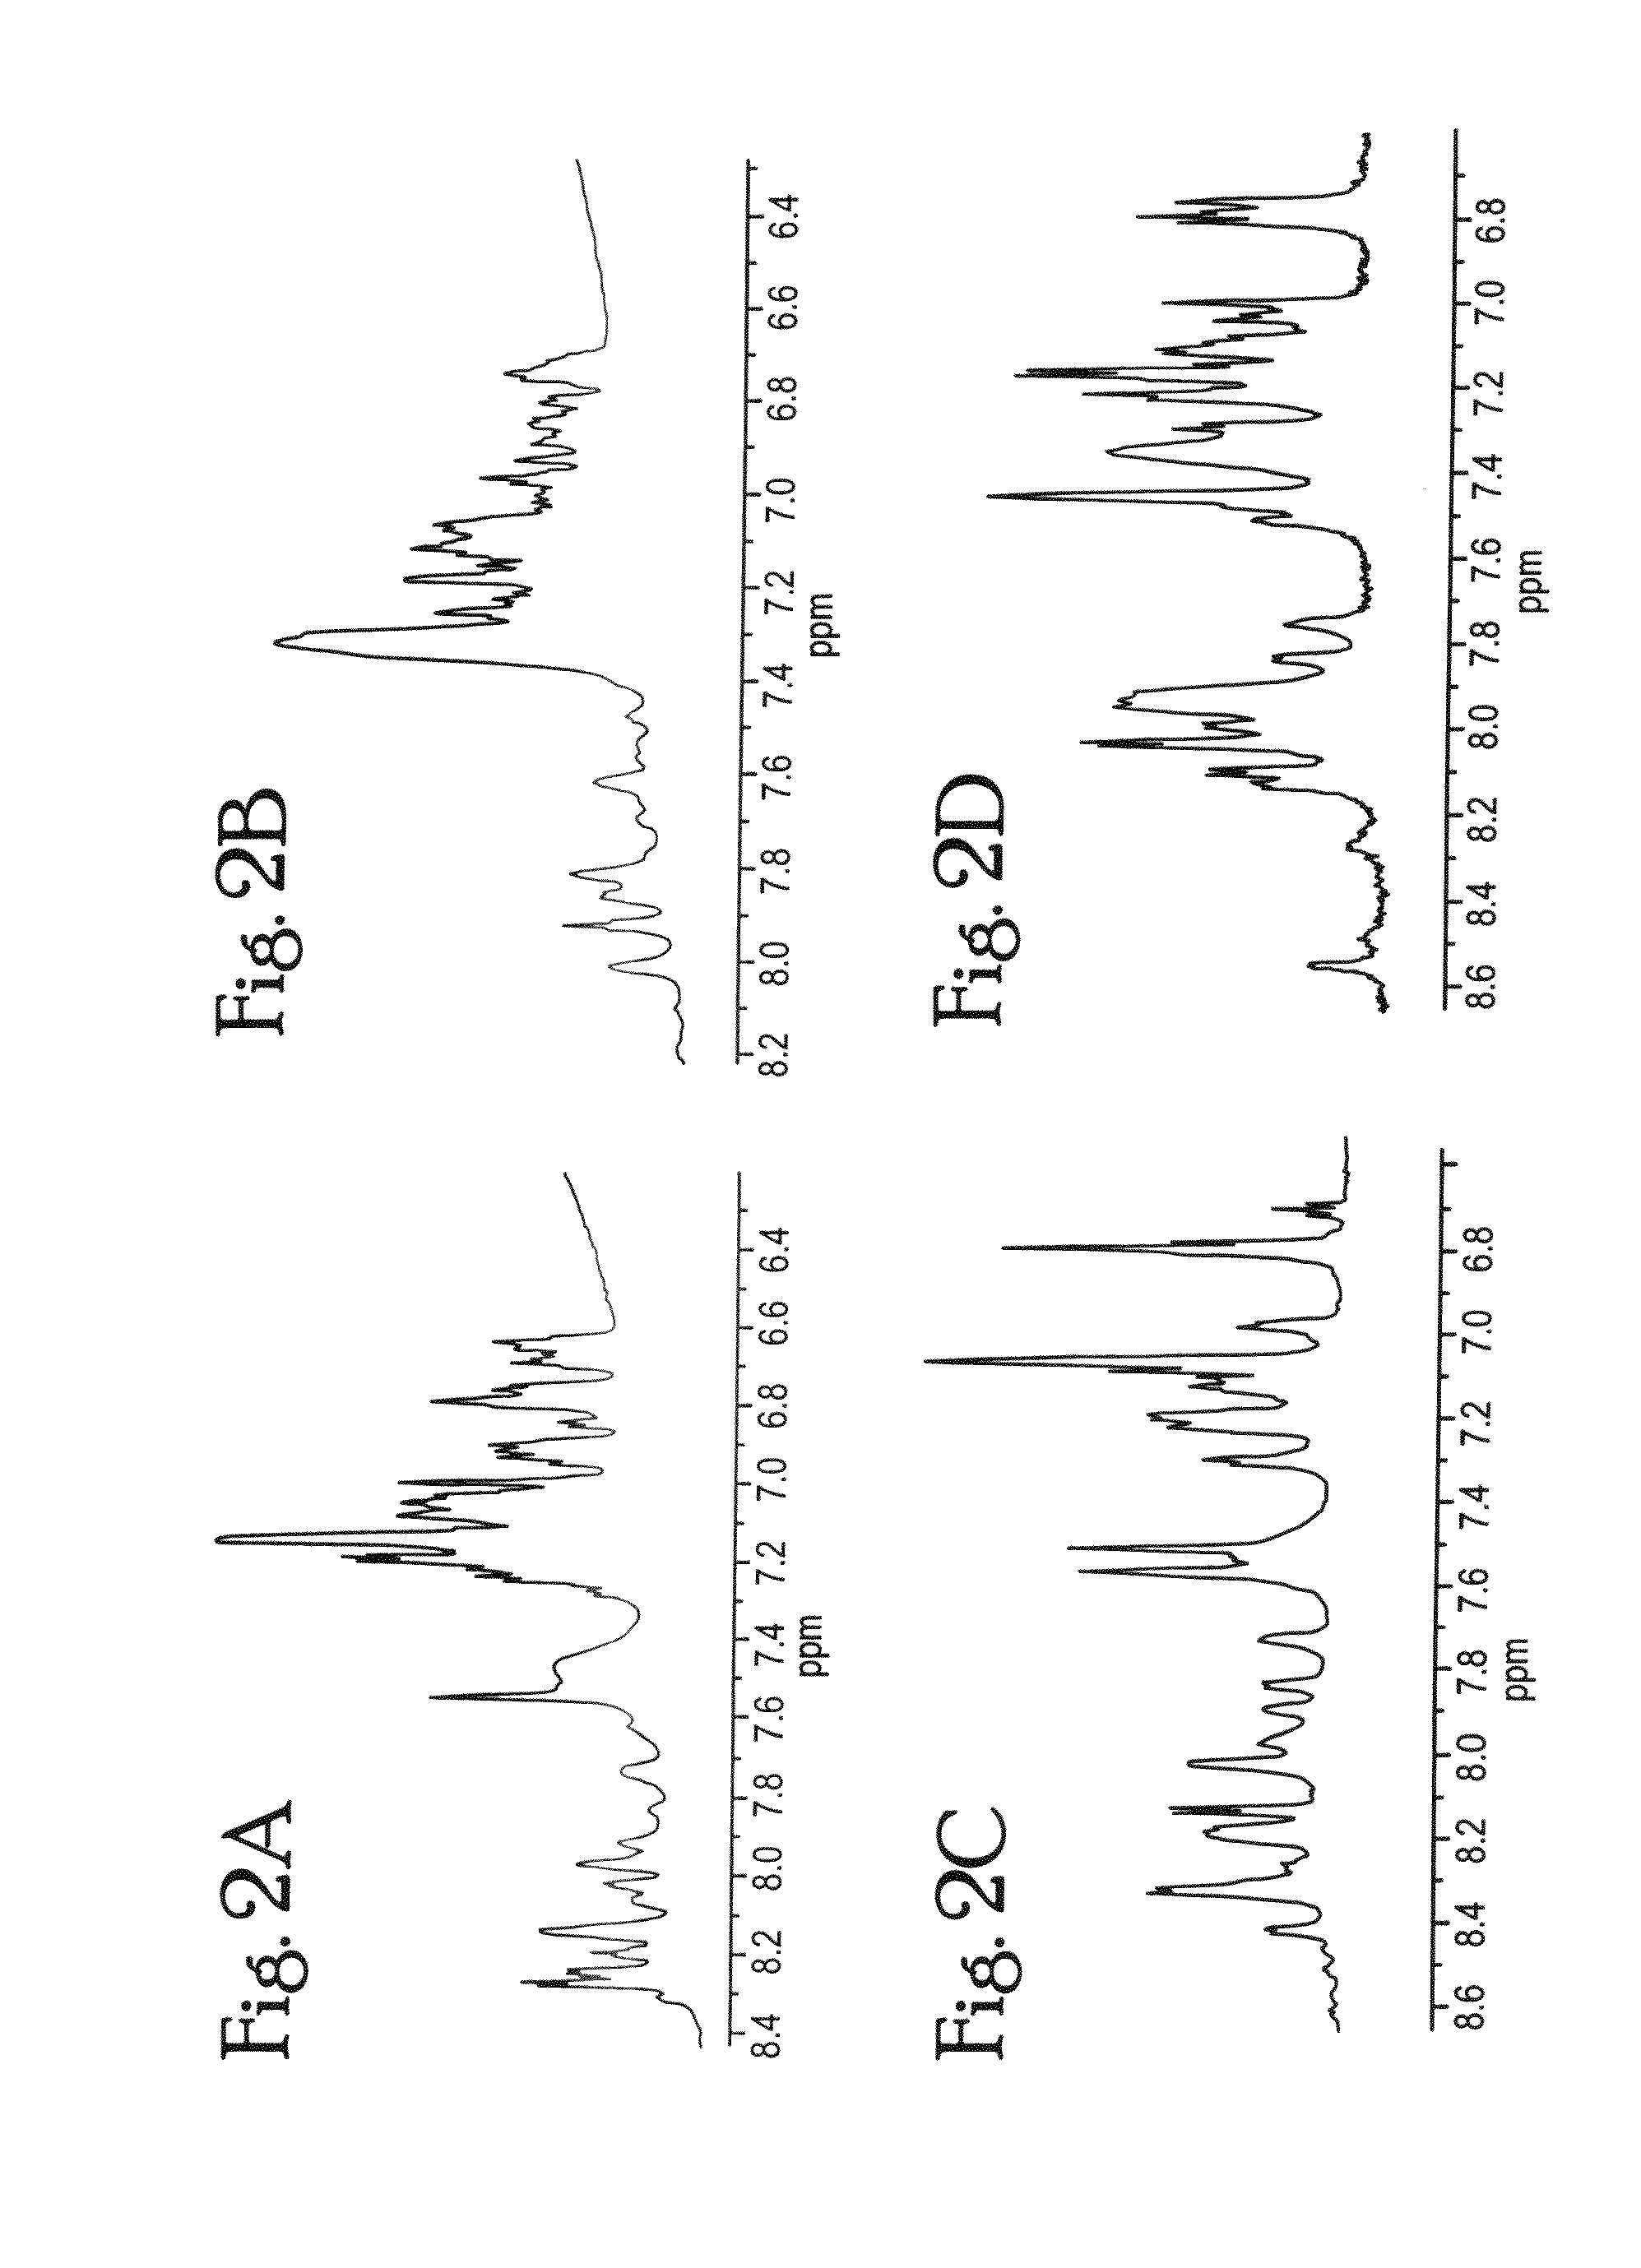 Novel anti-microbial peptidomimetic compounds and methods to calculate anti-microbial activity